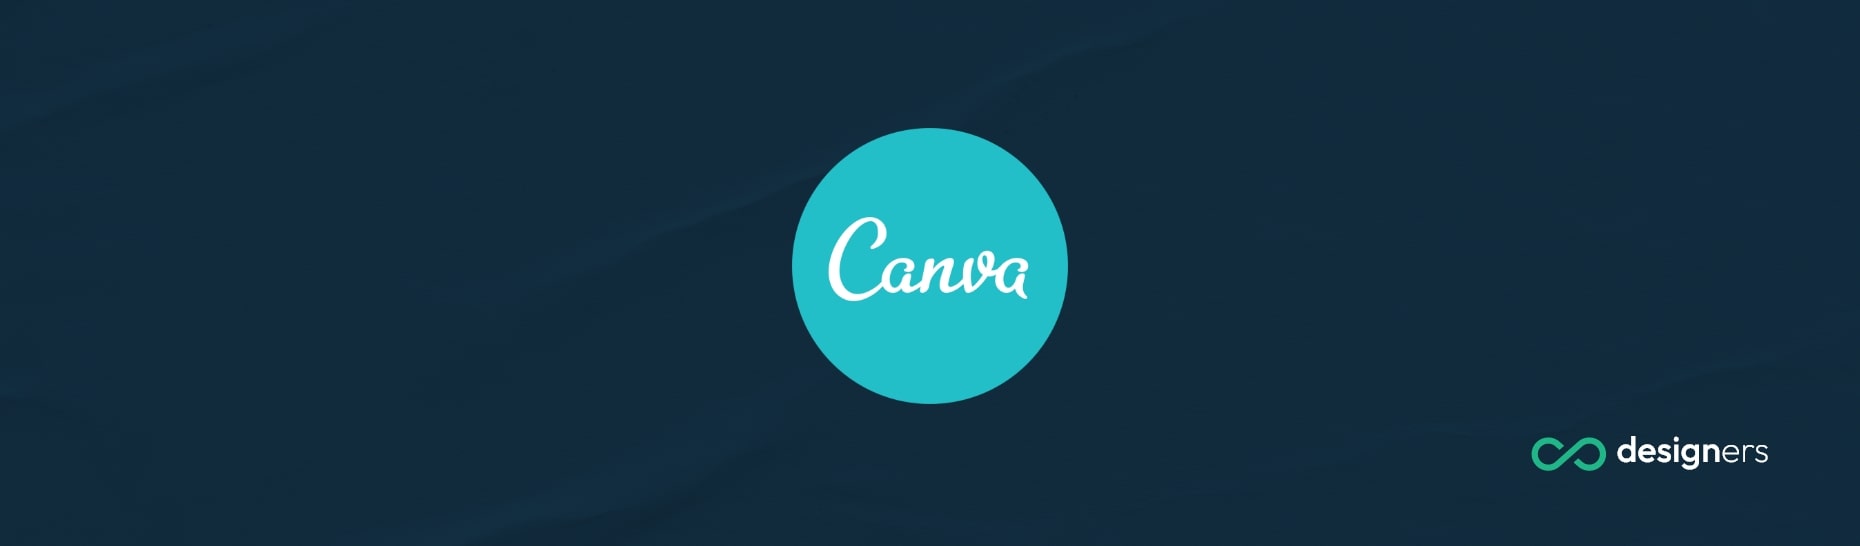 Is Canva Compatible With Mac?